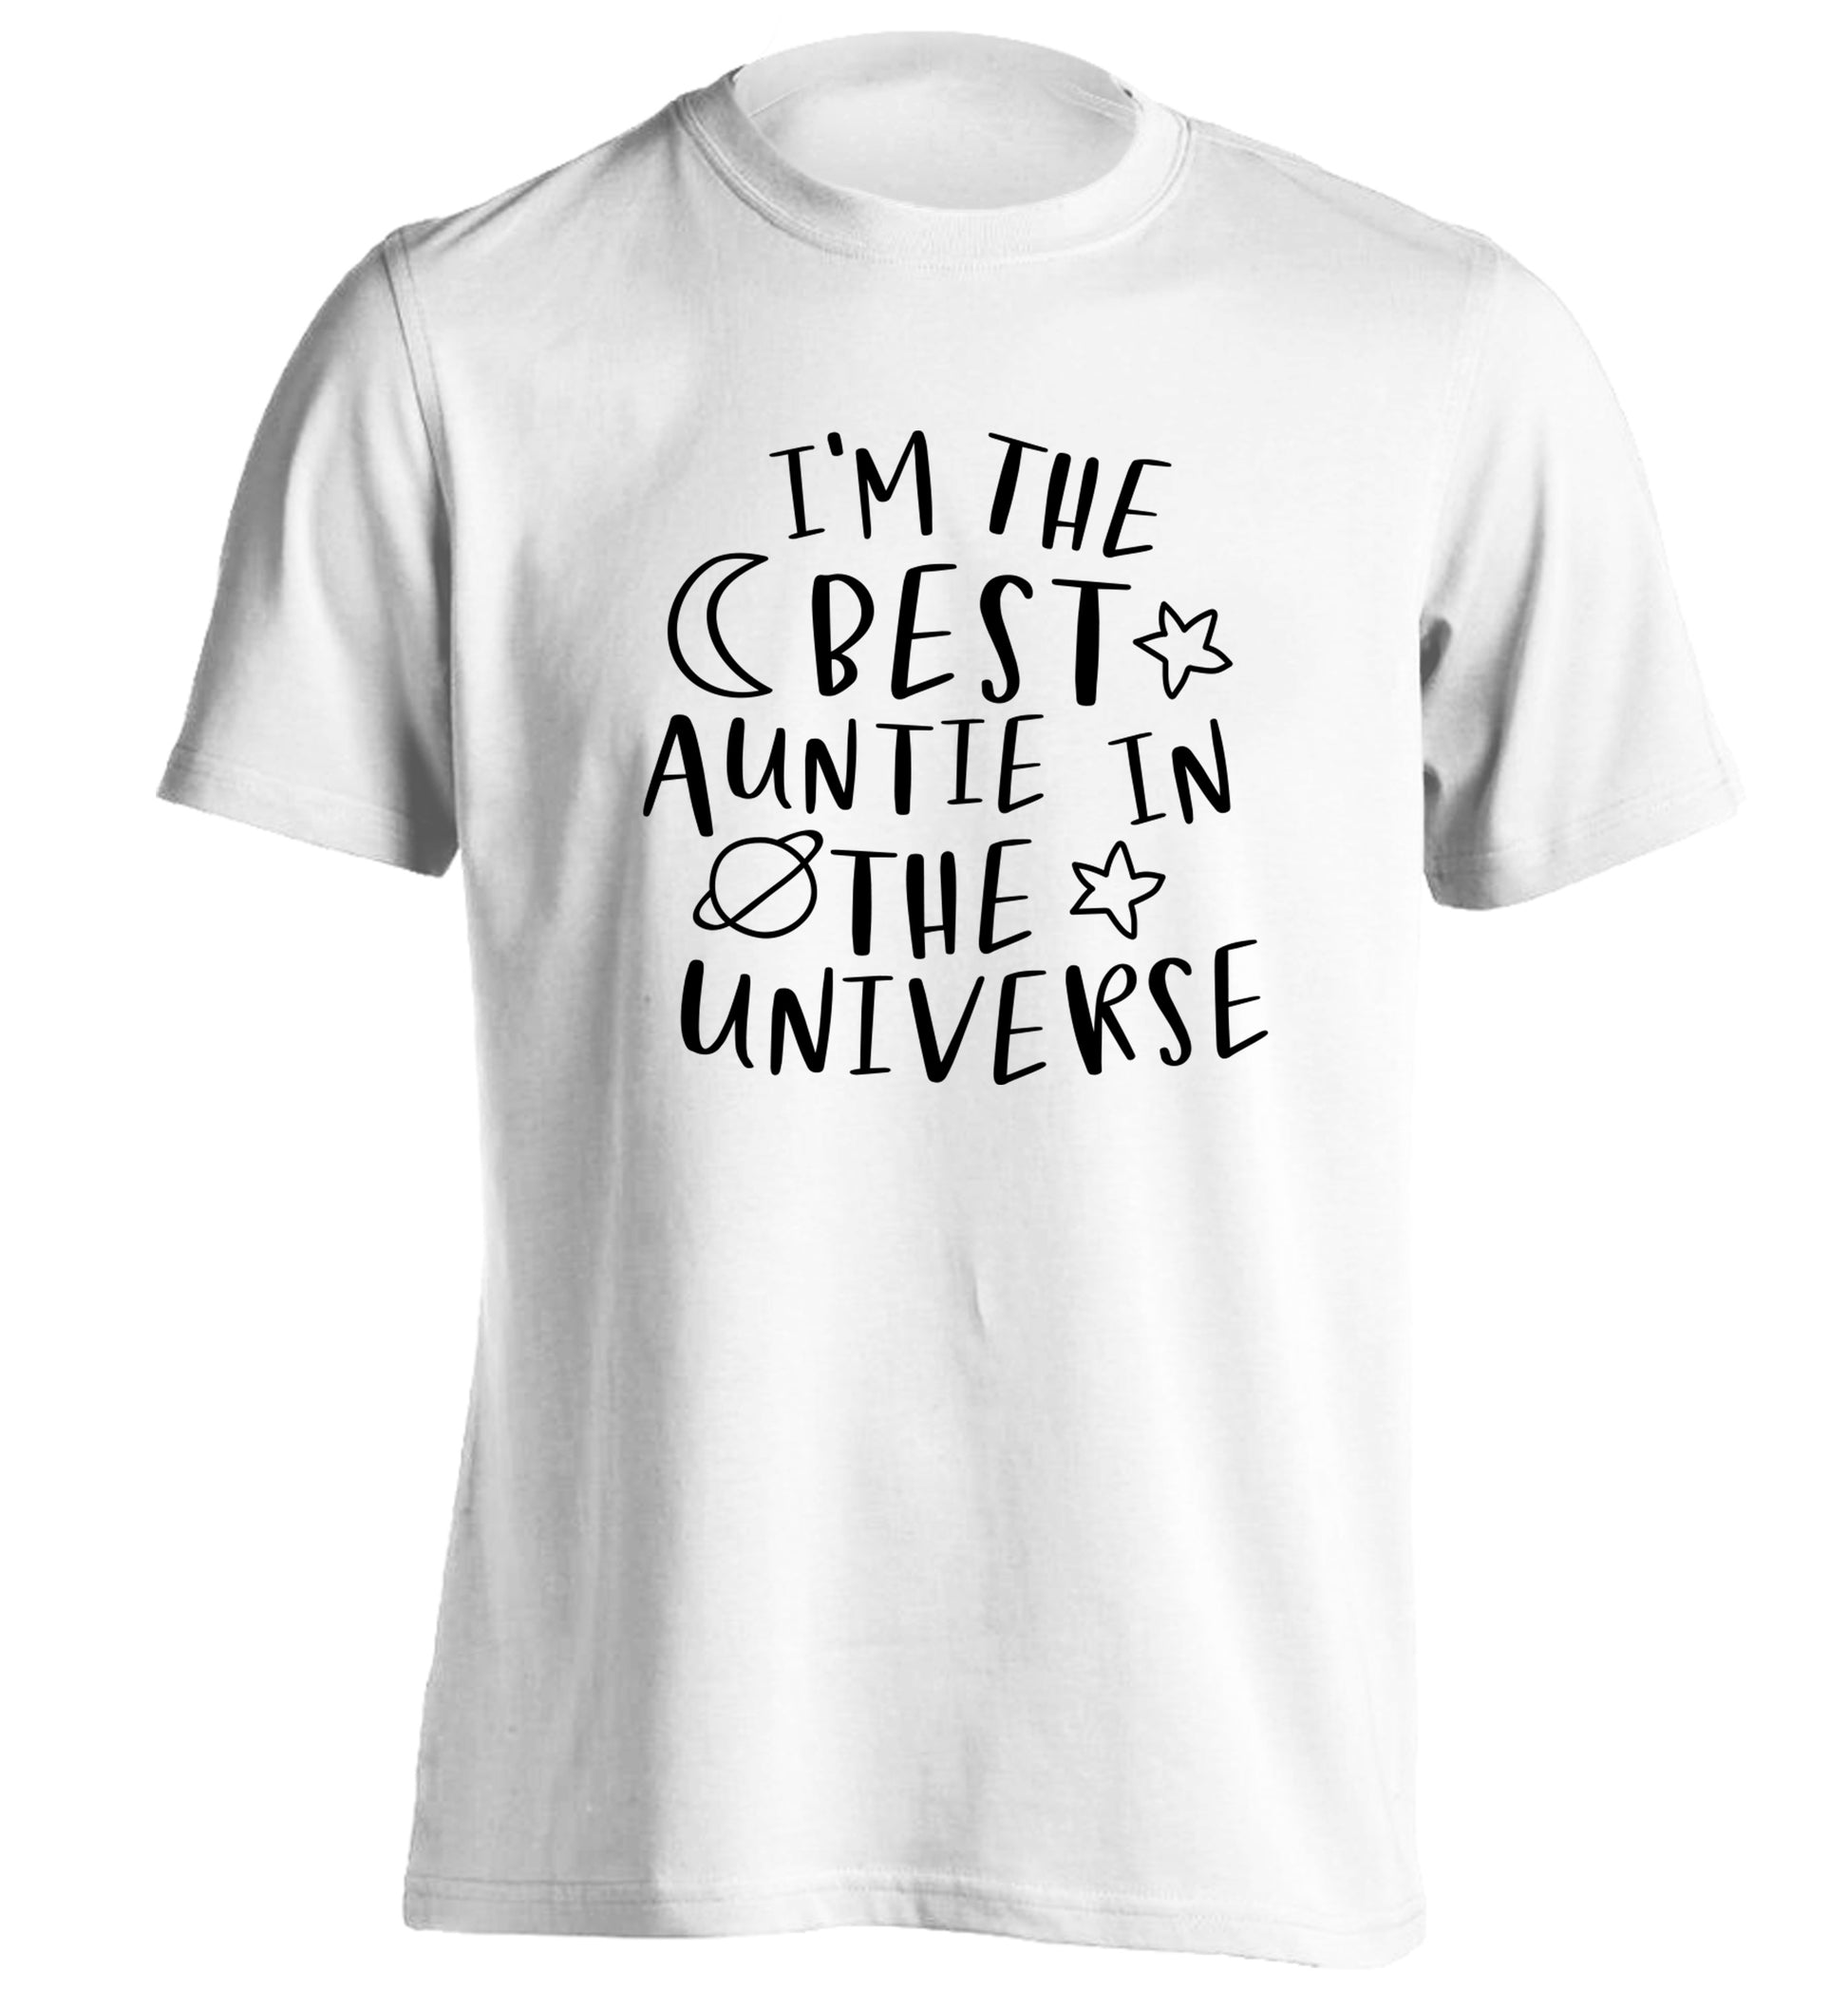 I'm the best auntie in the universe adults unisex white Tshirt 2XL